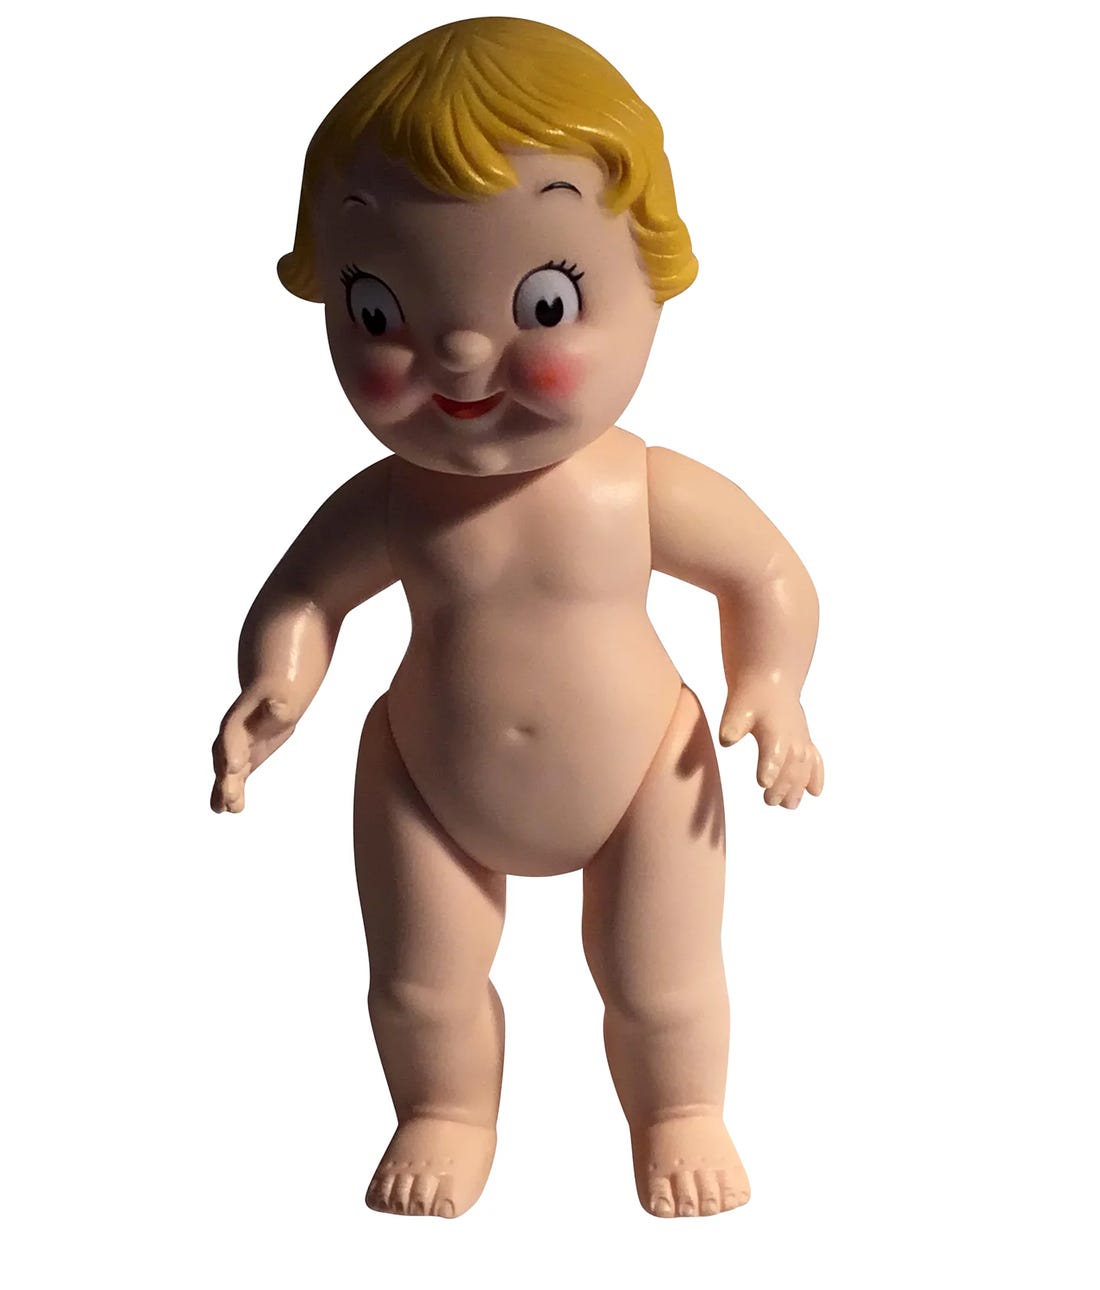 Oh my god. It's a naked blond baby with these wide eyes with dark pupils and rosy cheeks and a mouth that dares you to come near because it will bite you and infect your soul. I am shuddering as I write this, I swear to you.